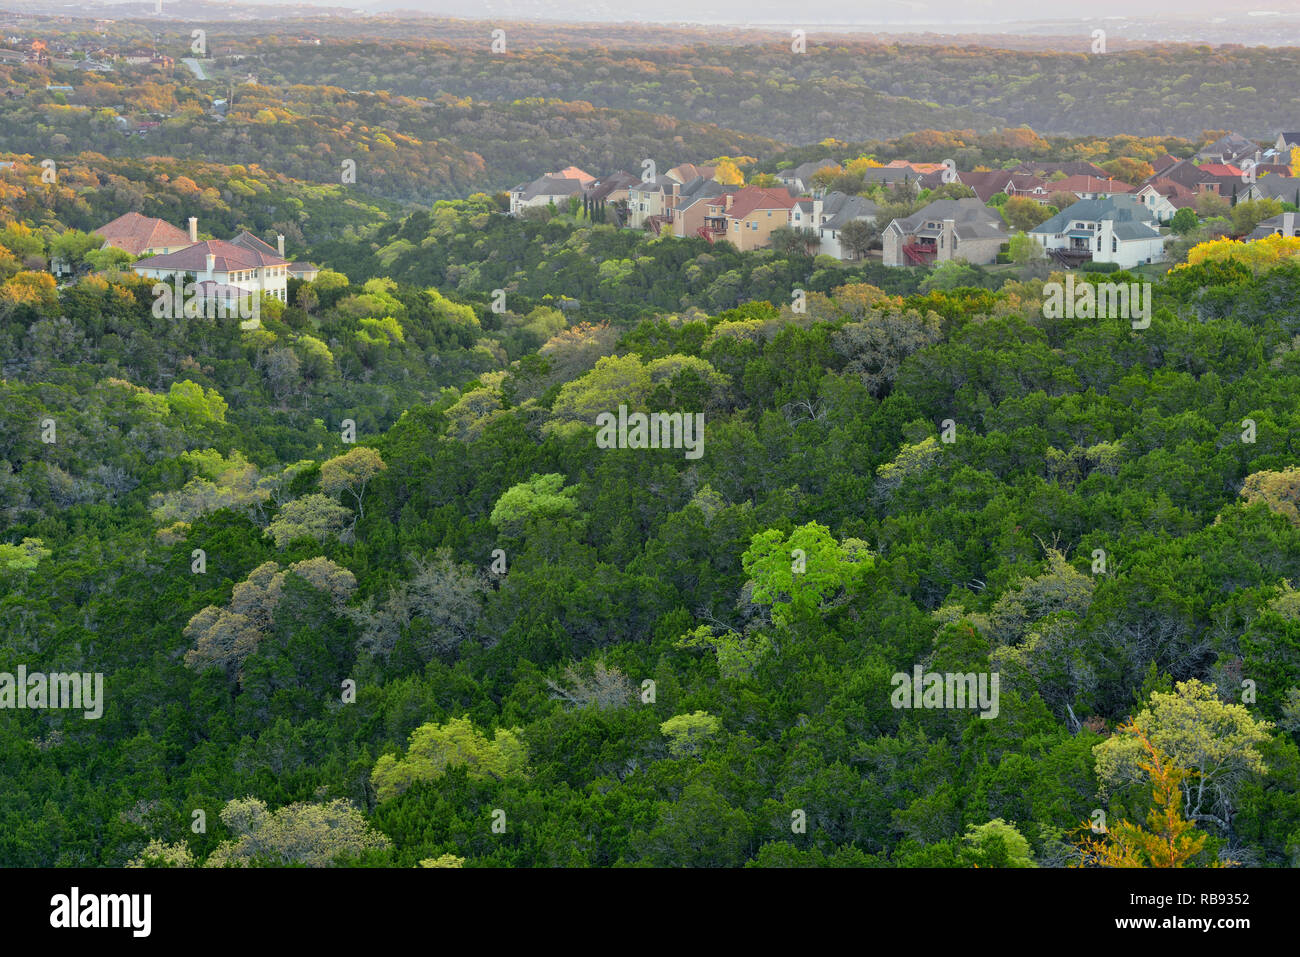 Overlooking Hill Country bedroom communities at sunrise, Austin, Texas, USA Stock Photo